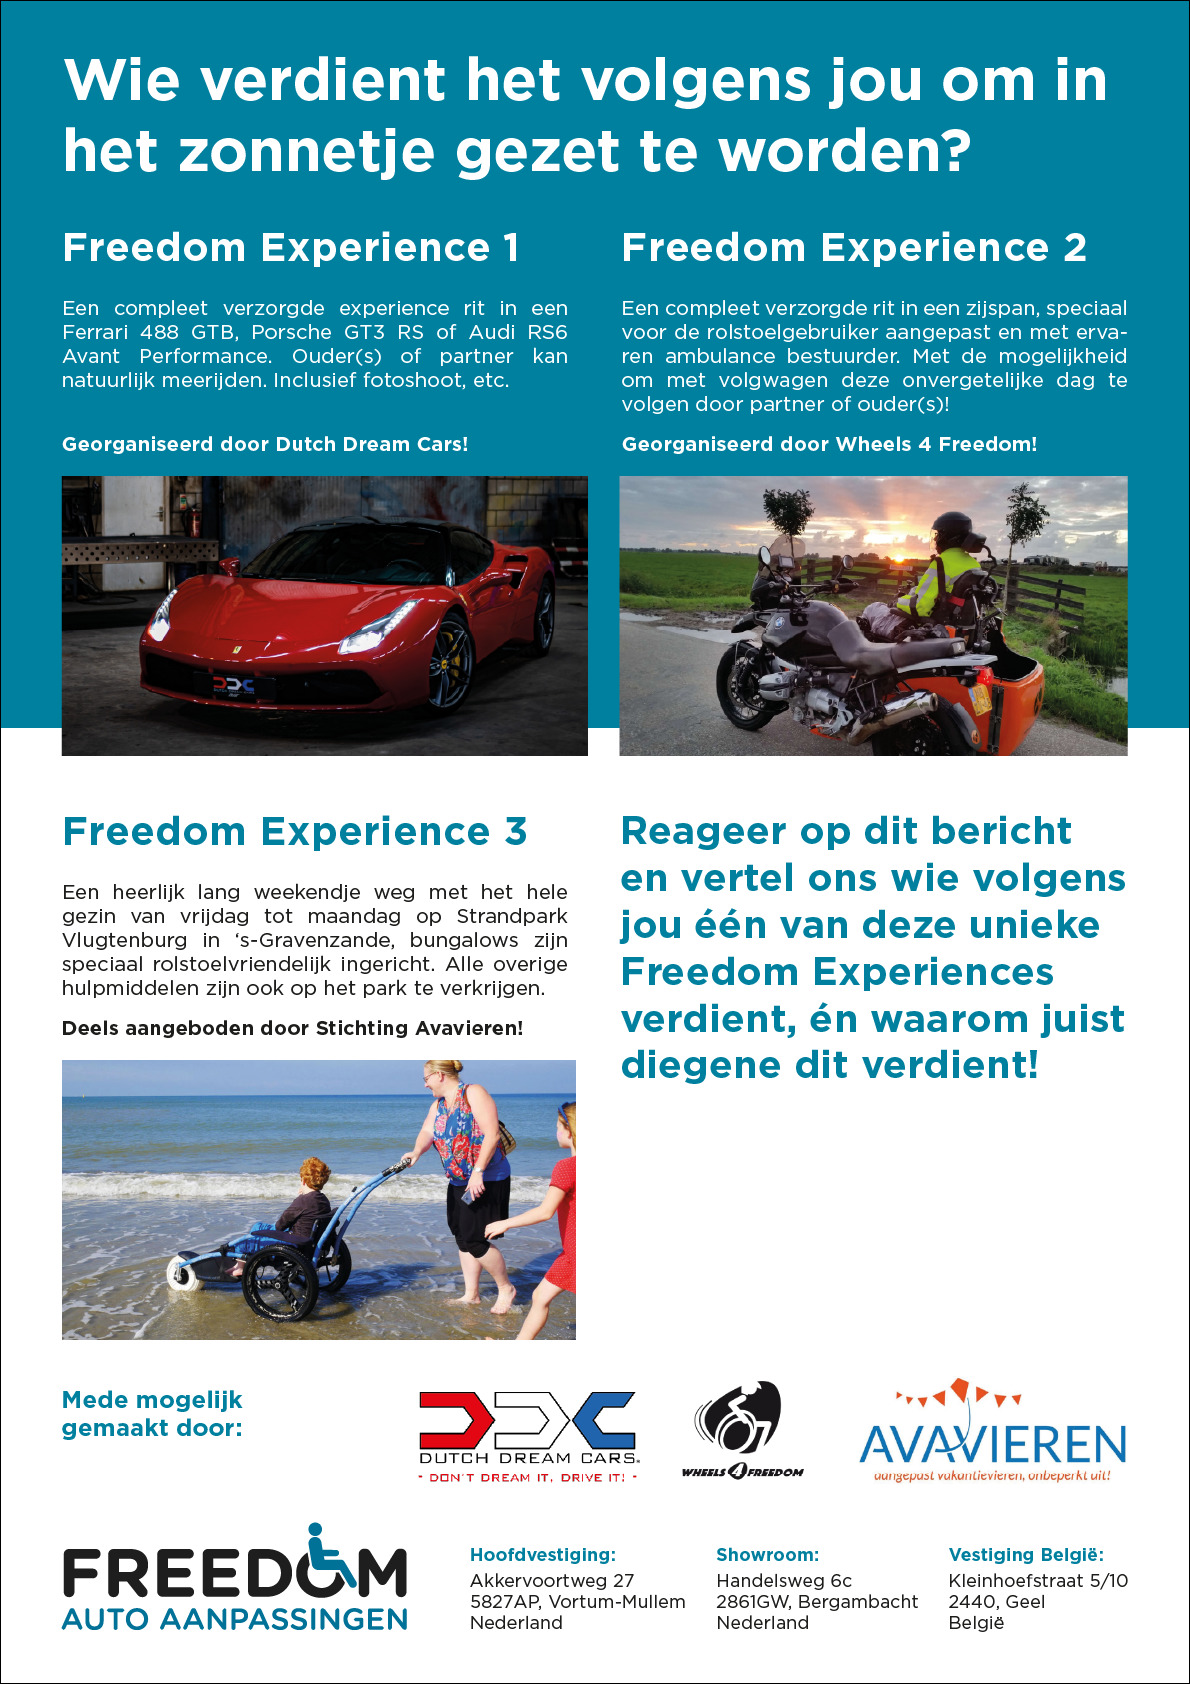 Freedom Experiences giveaway